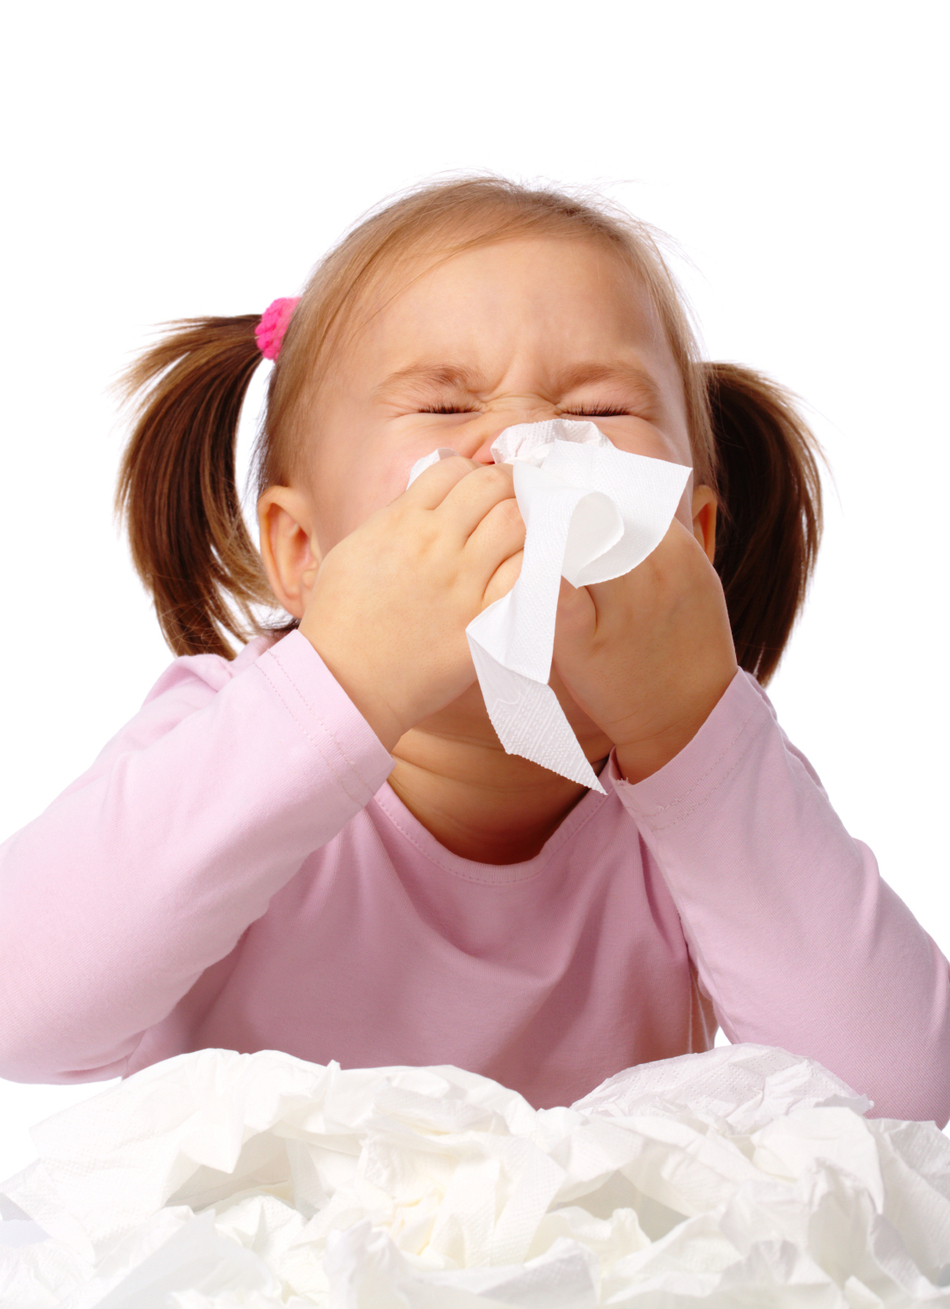 The Skinny on Snot: What Your Child's Mucus Says About Their Health